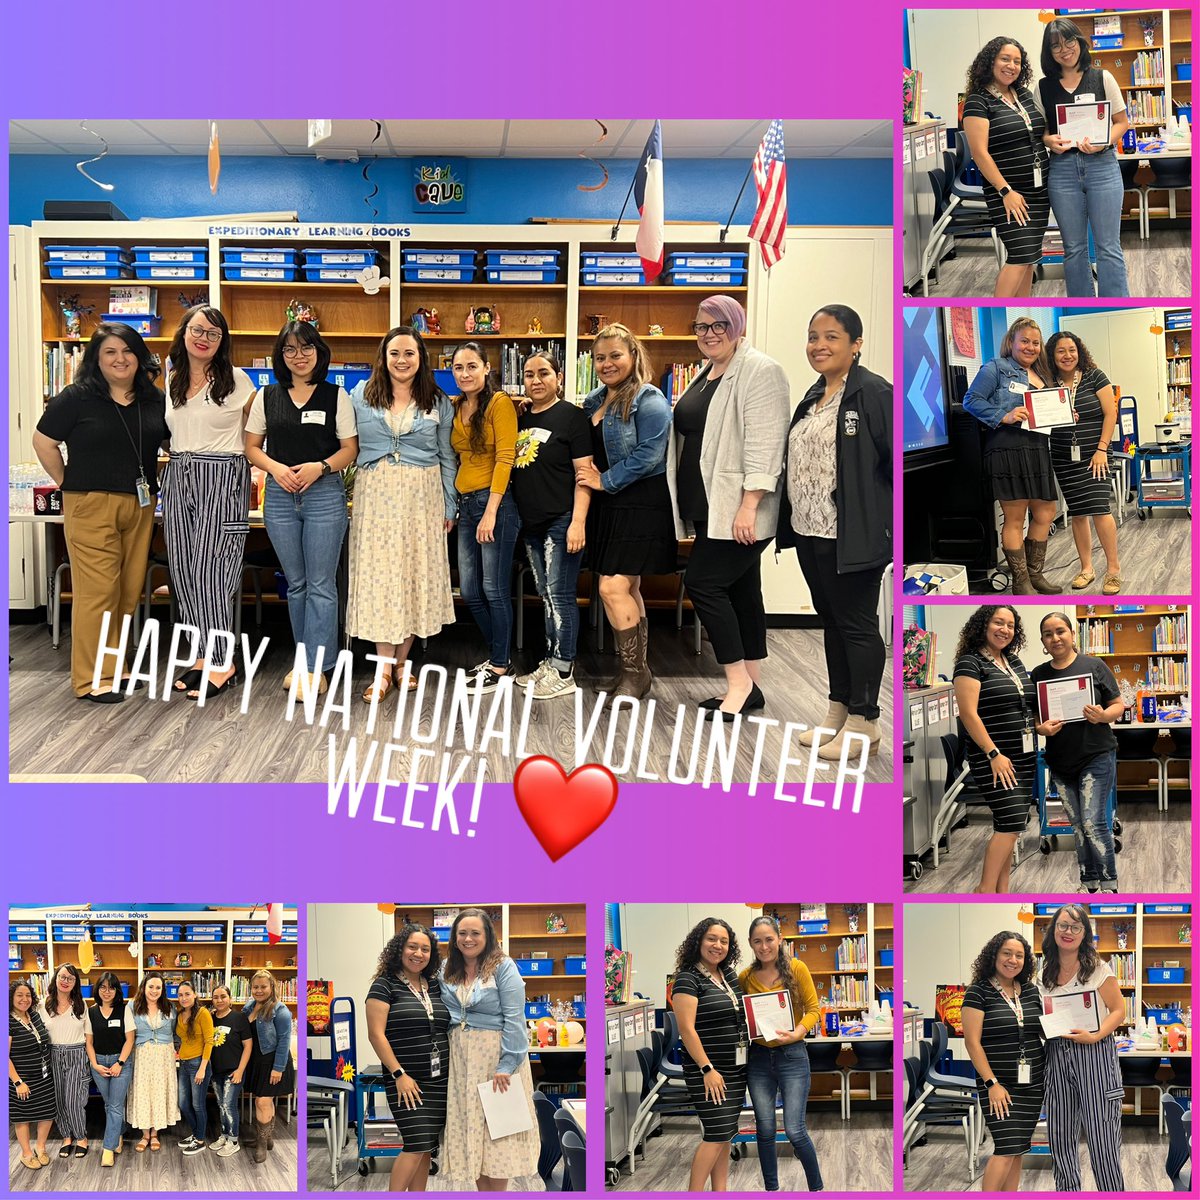 Happy National Volunteer Week to these amazing Parents who help support our students and staff at Mendez each and every day!! We couldn’t do this without you!!! 👏🏻👏🏻❤️🐺 @_HectorMartinez @LauraRubioGarza @DallasISDSupt @Region2DISD